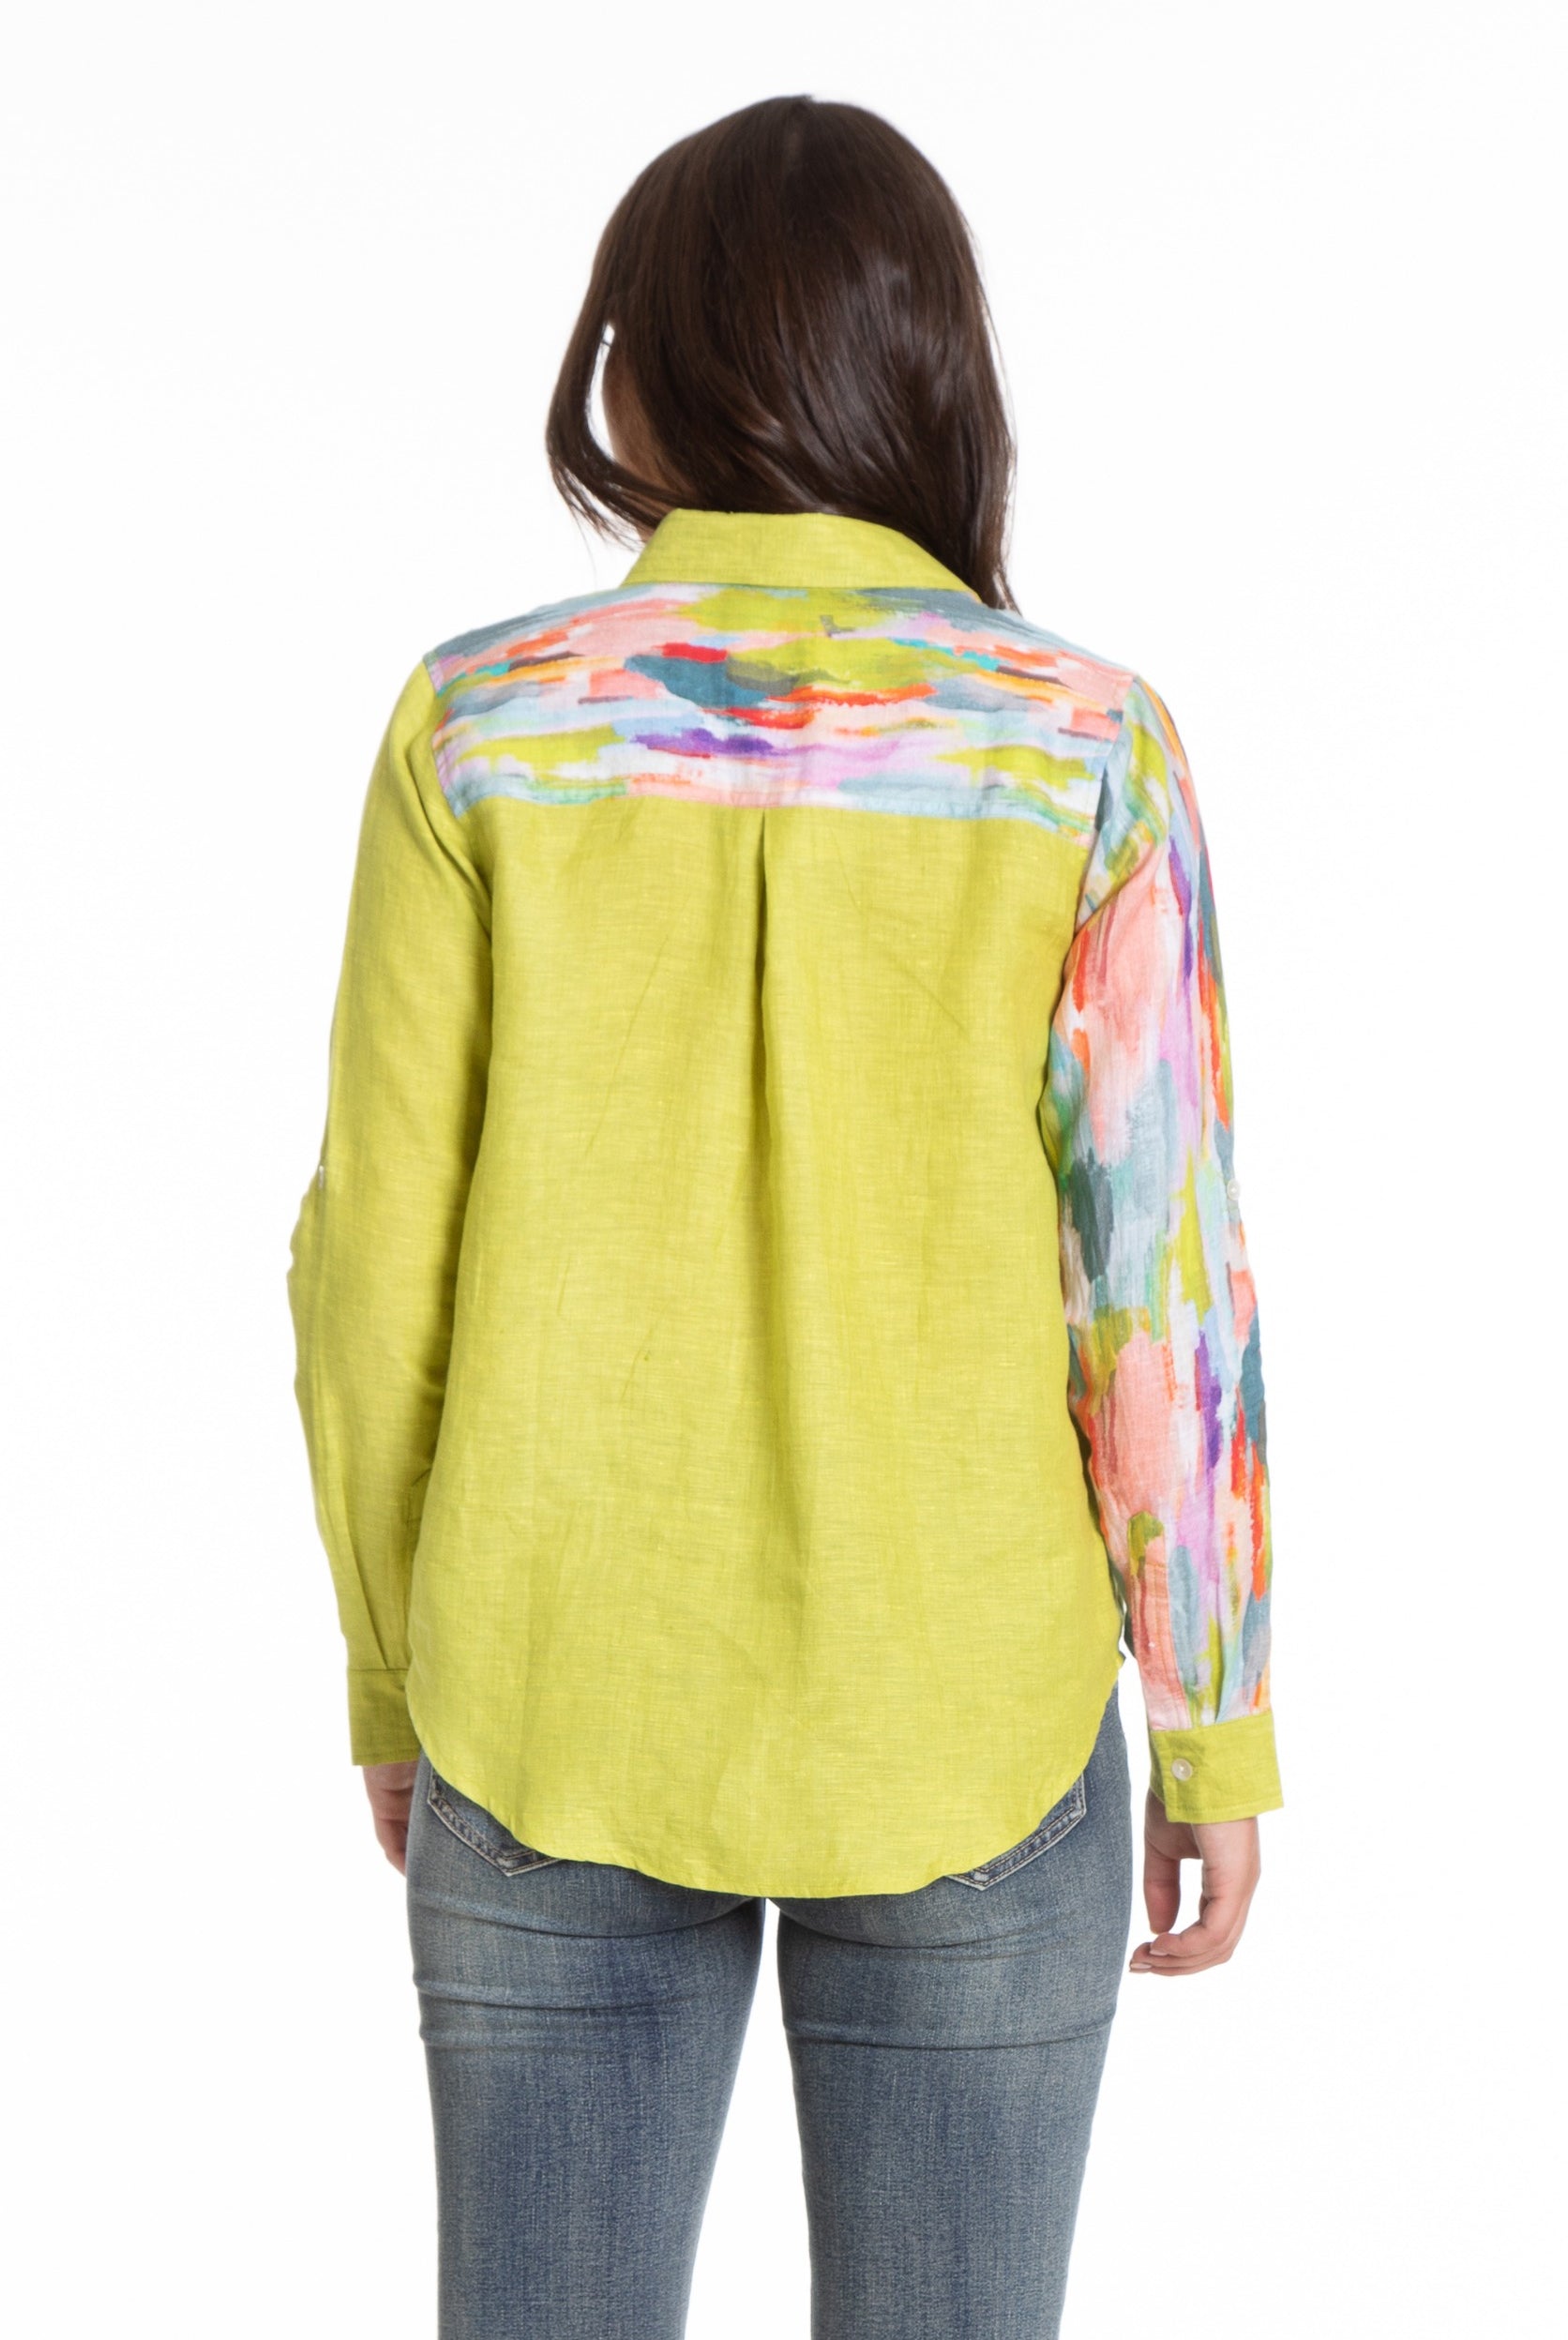 Colorful Abstract Mixed Media Print - Button-up with Roll up Tab Sleeve/Mix Media Back APNY